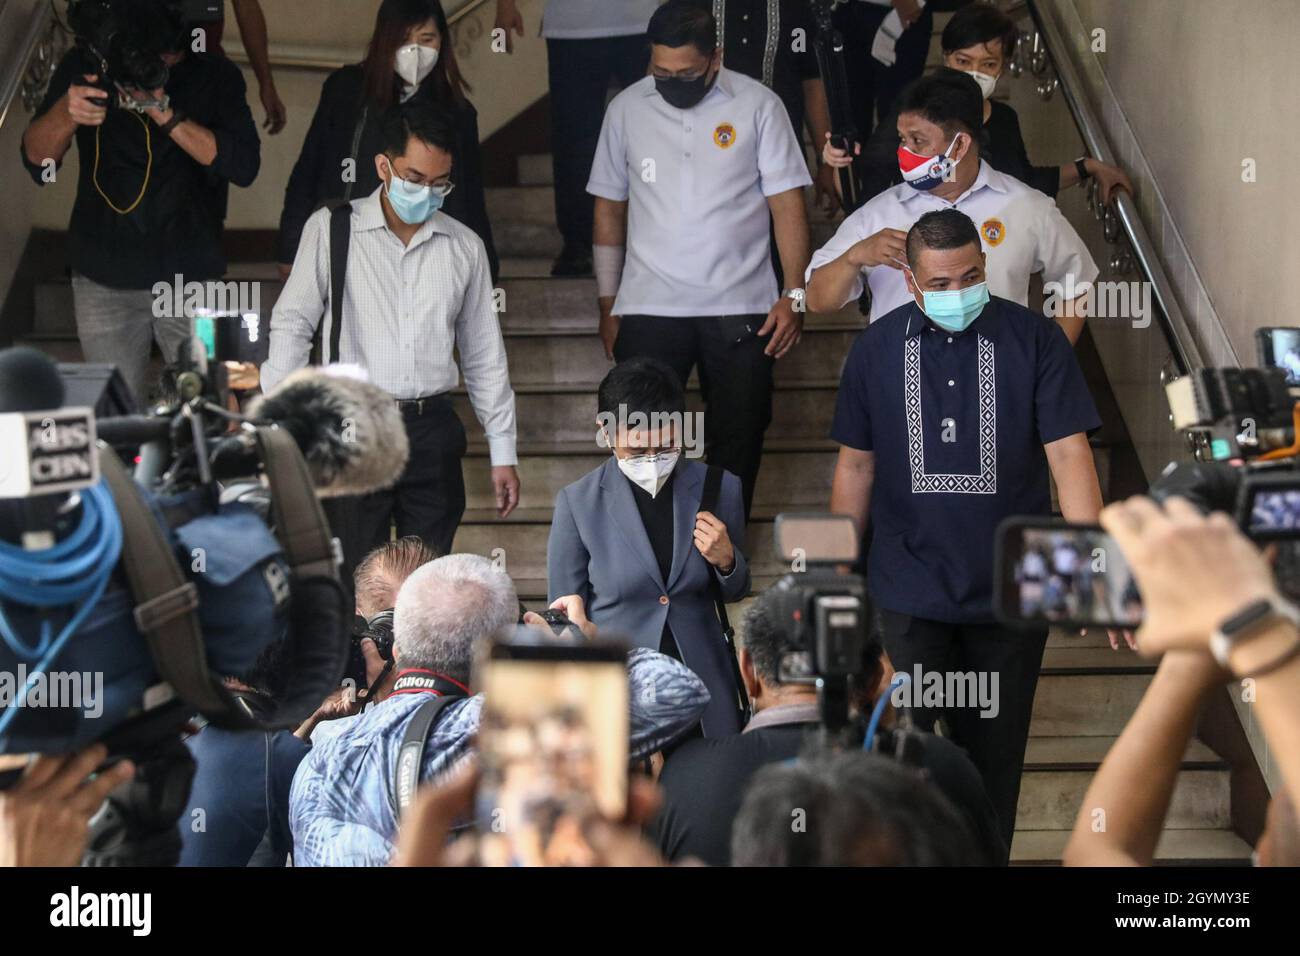 Rappler CEO and Executive Editor, Maria Ressa (center) wearing a protective mask is escorted to a media conference after a court hearing at the Manila Regional Trial Court, Philippines on Monday. June 15, 2020. The Manila court found Maria Ressa, her online news outfit Rappler Inc. and former reporter Reynaldo Santos Jr. guilty of cyber libel. Philippines. Stock Photo